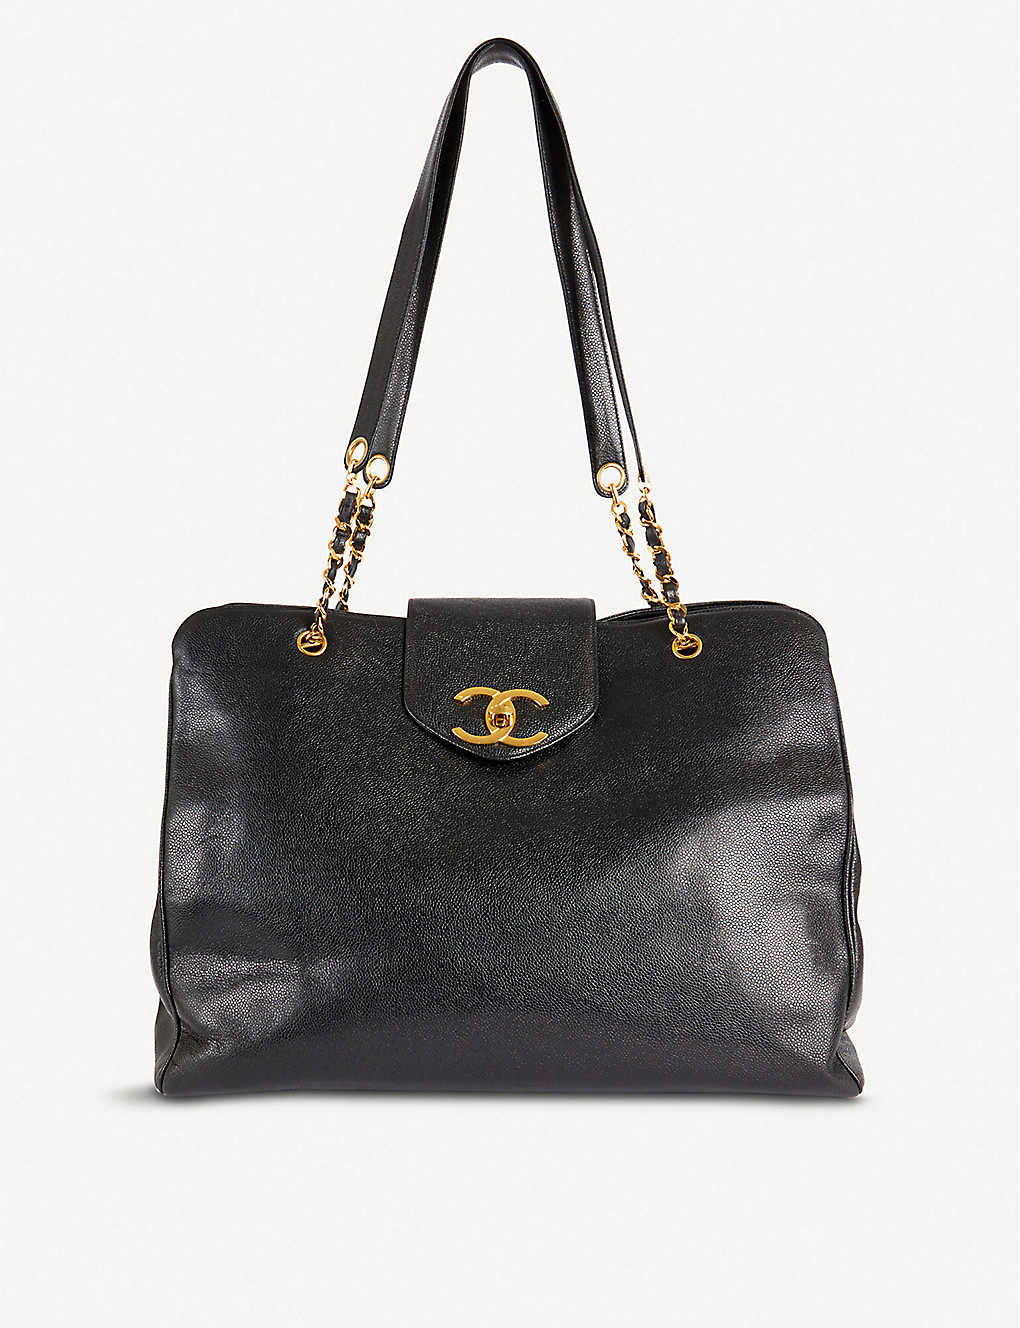 VESTIAIRE COLLECTIVE - Chanel Leather Travel Bag